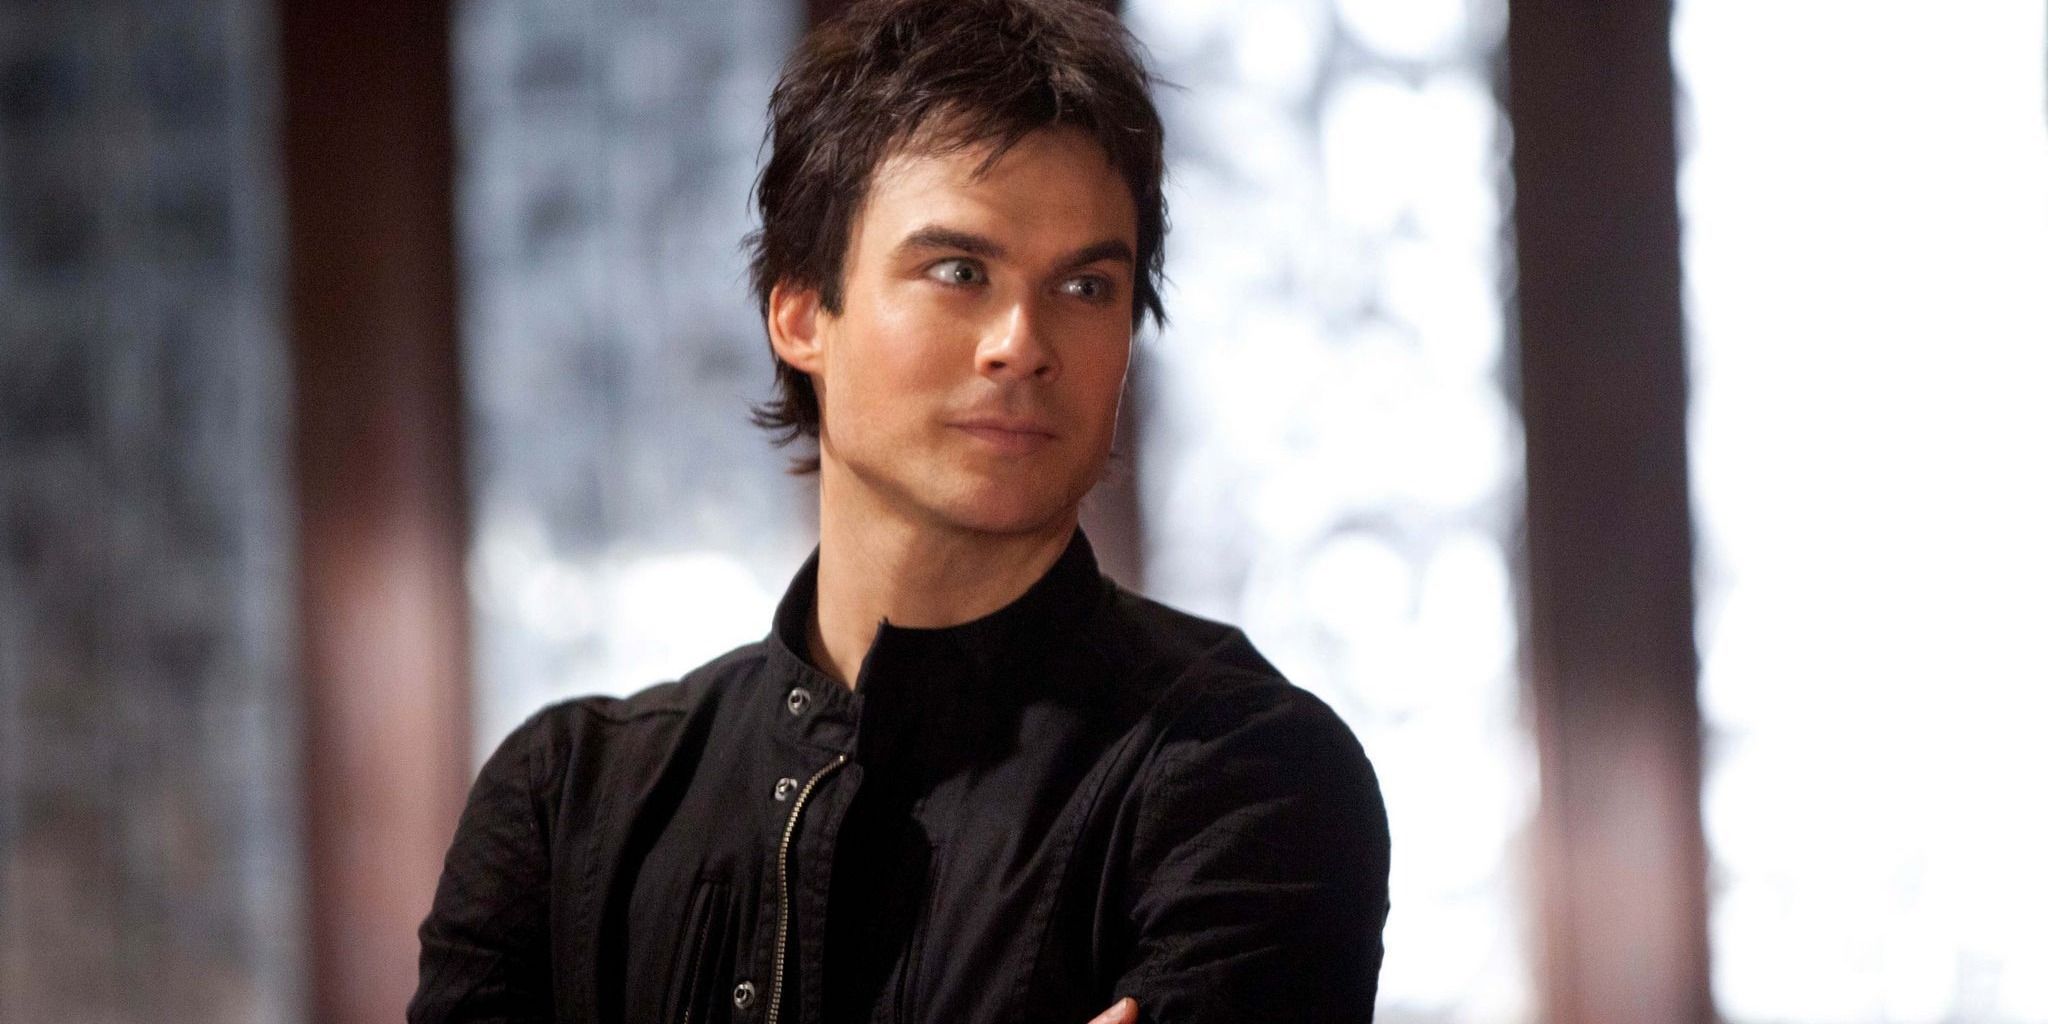 Damon standing with his arms crossed, looking at something with an amused expression.